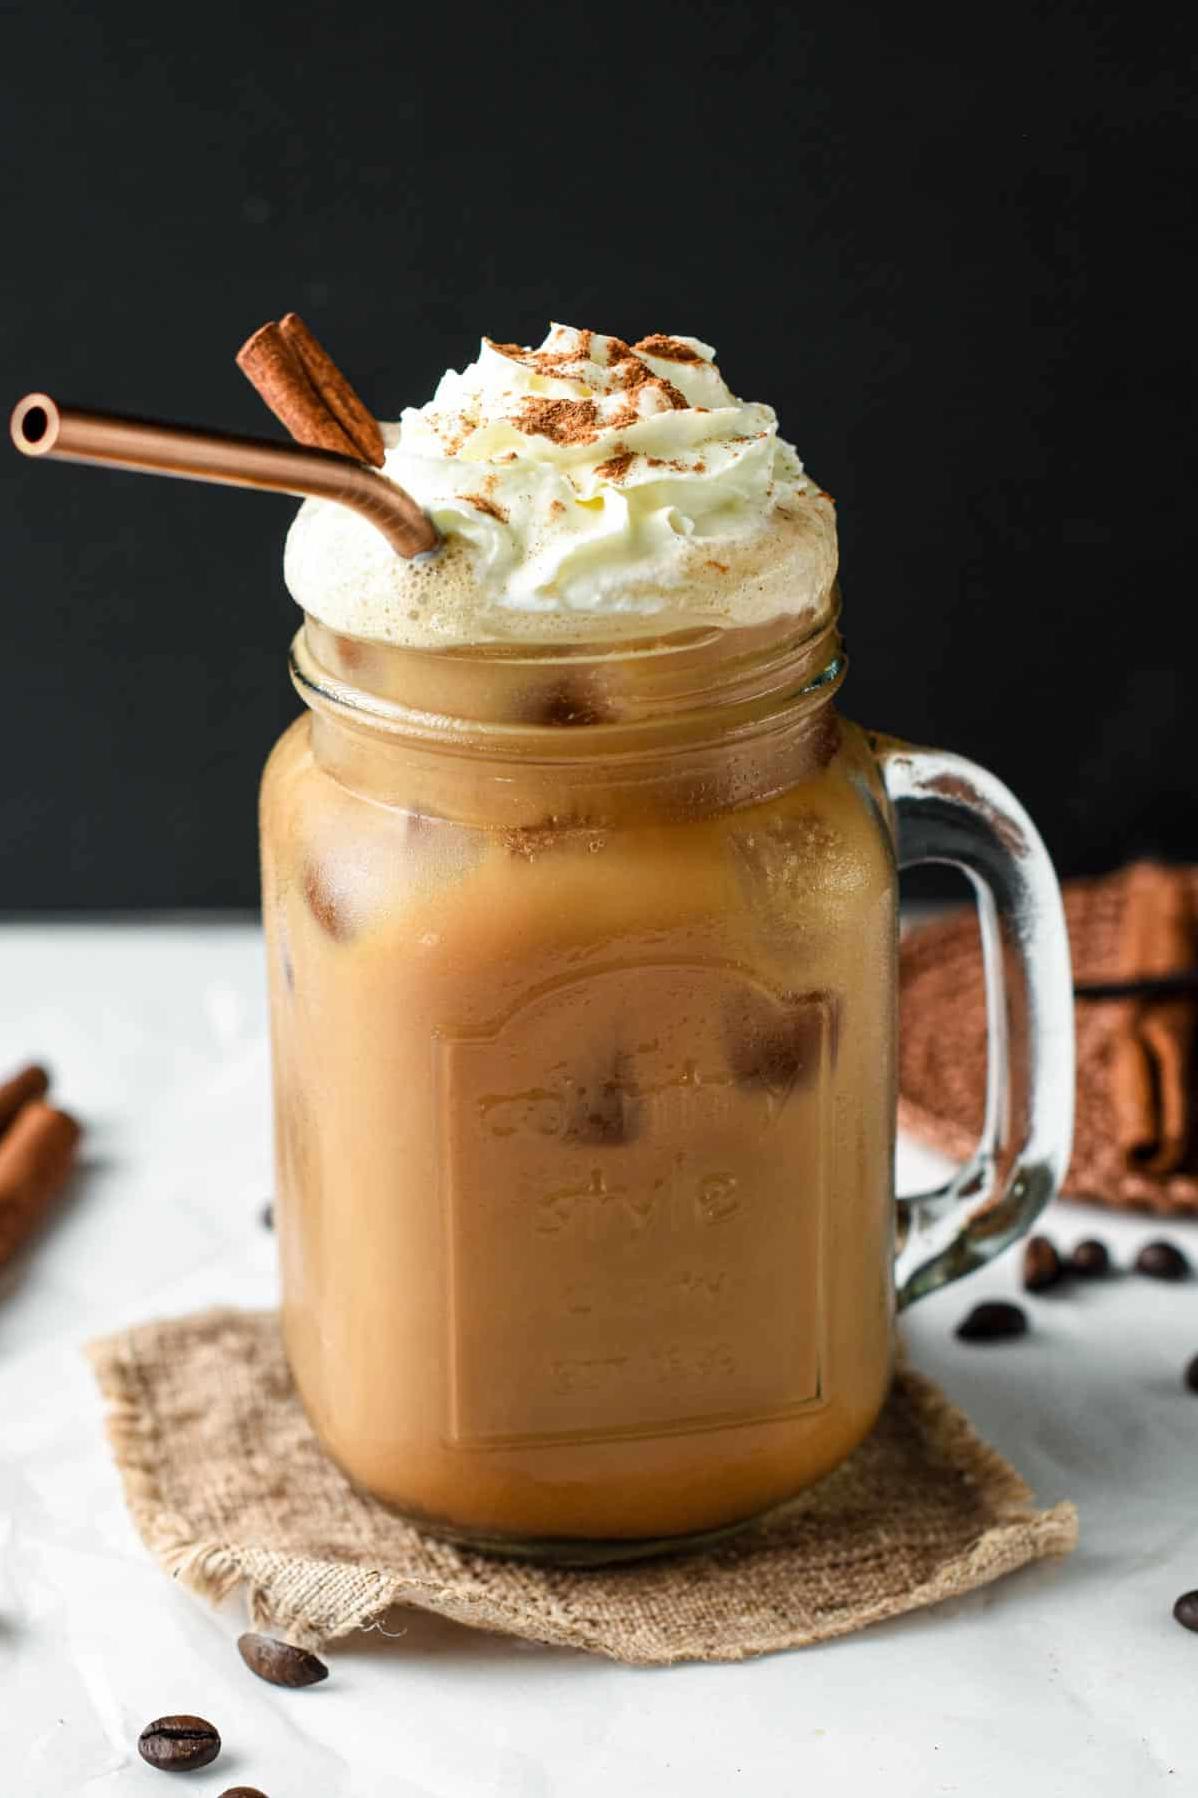  Prepare to be addicted to this Spiced Iced Coffee!